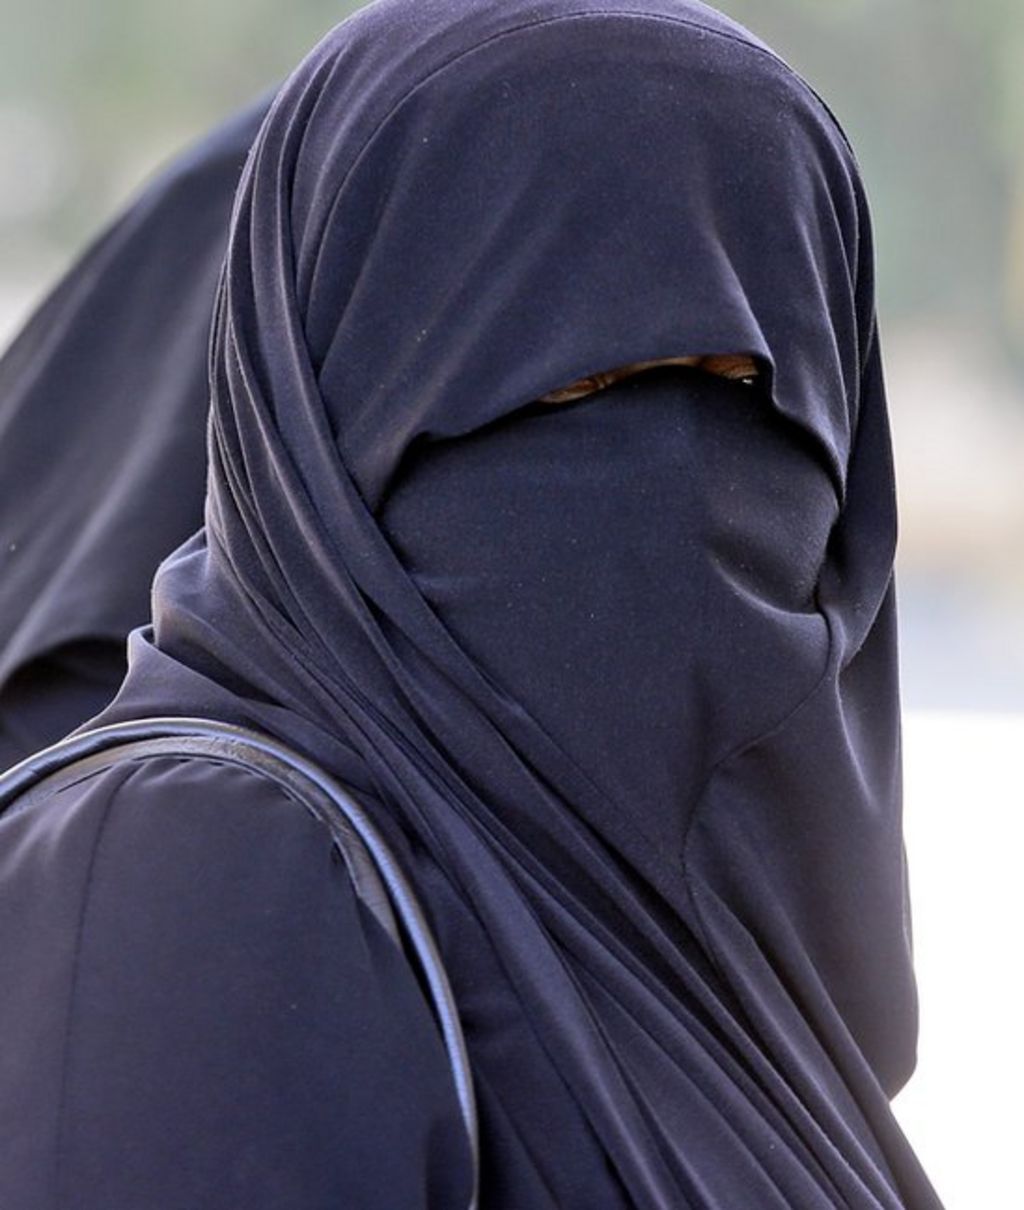 Germany Burka Ban To Be Proposed In Security Clampdown Bbc News